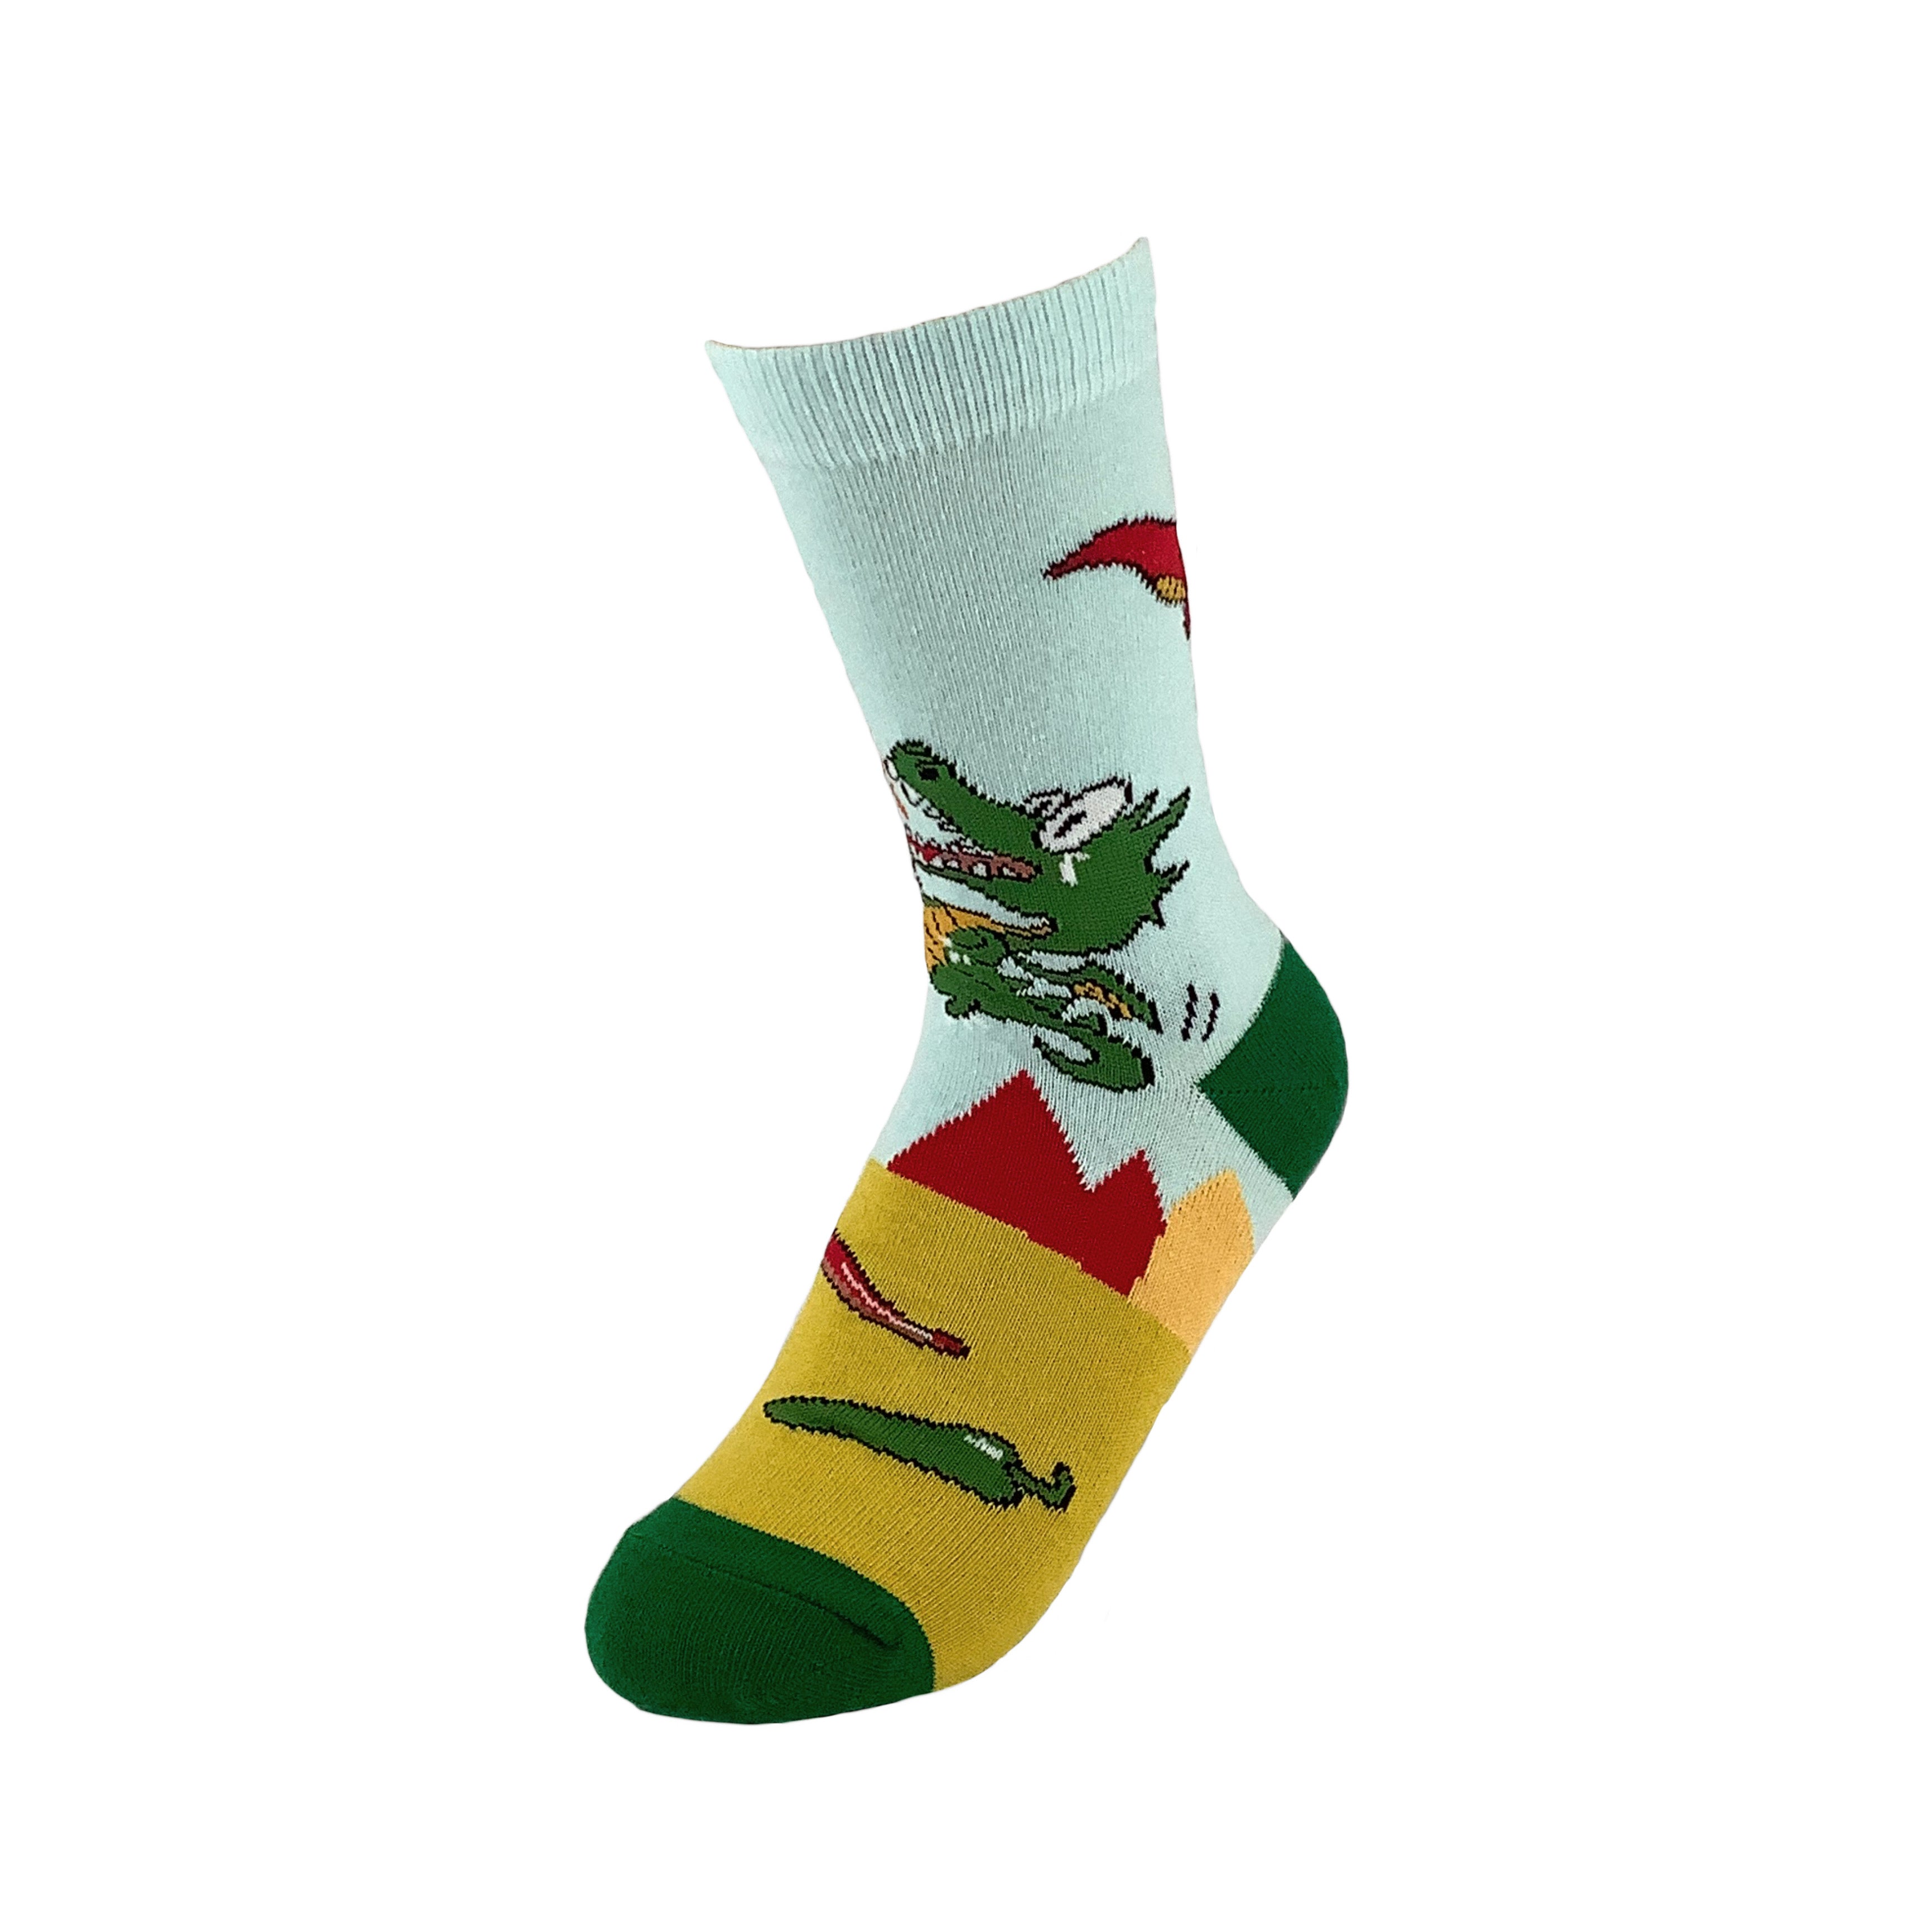 Dragon Pepper and Marshmallow Party Socks from the Sock Panda (Adult Small)